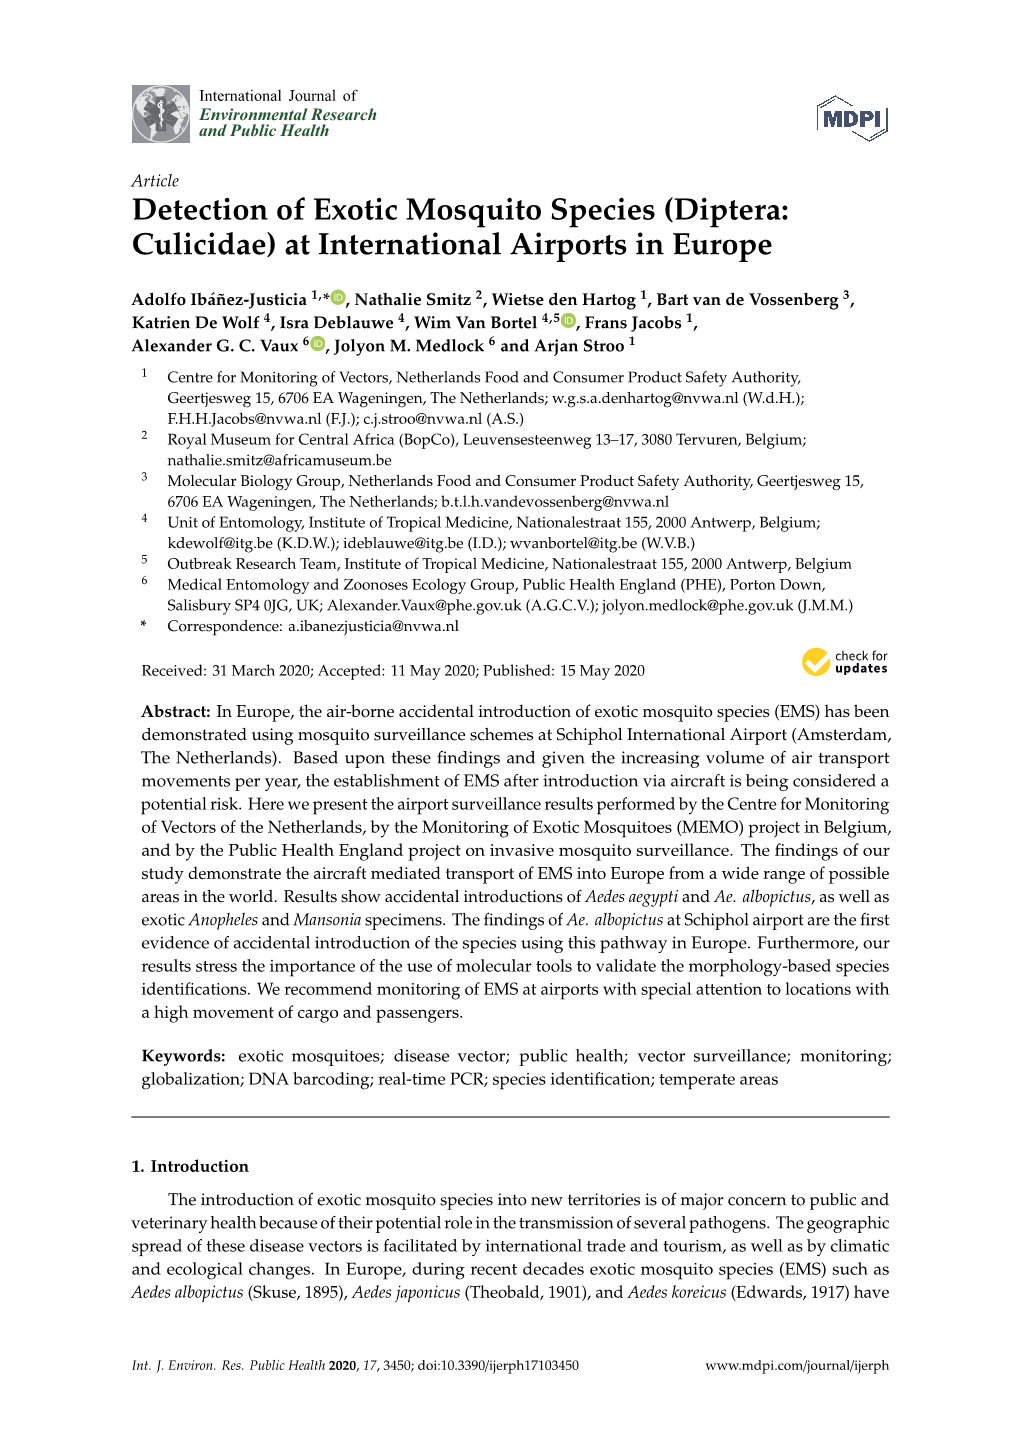 Detection of Exotic Mosquito Species (Diptera: Culicidae) at International Airports in Europe